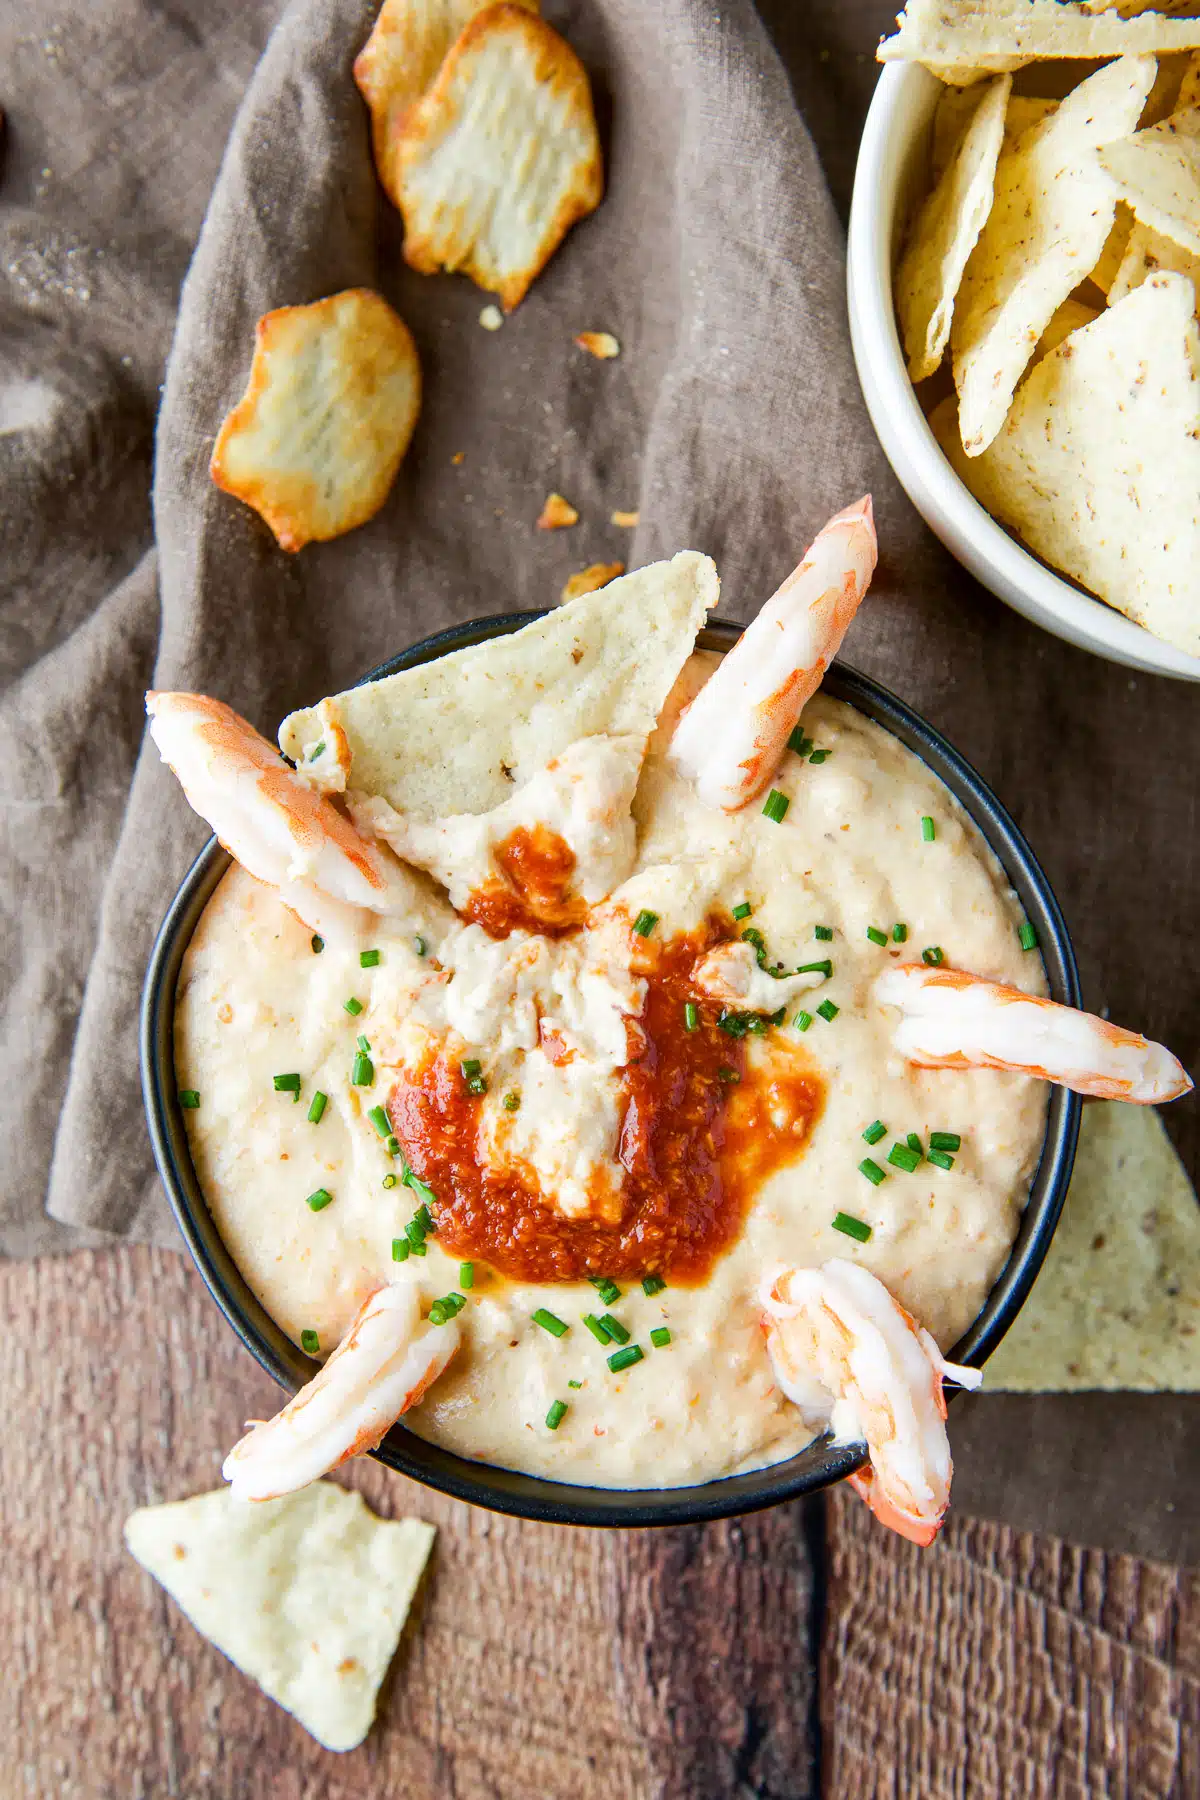 Overhead view of the dip with a chip in it, shrimp on the edges and sauce in the middle